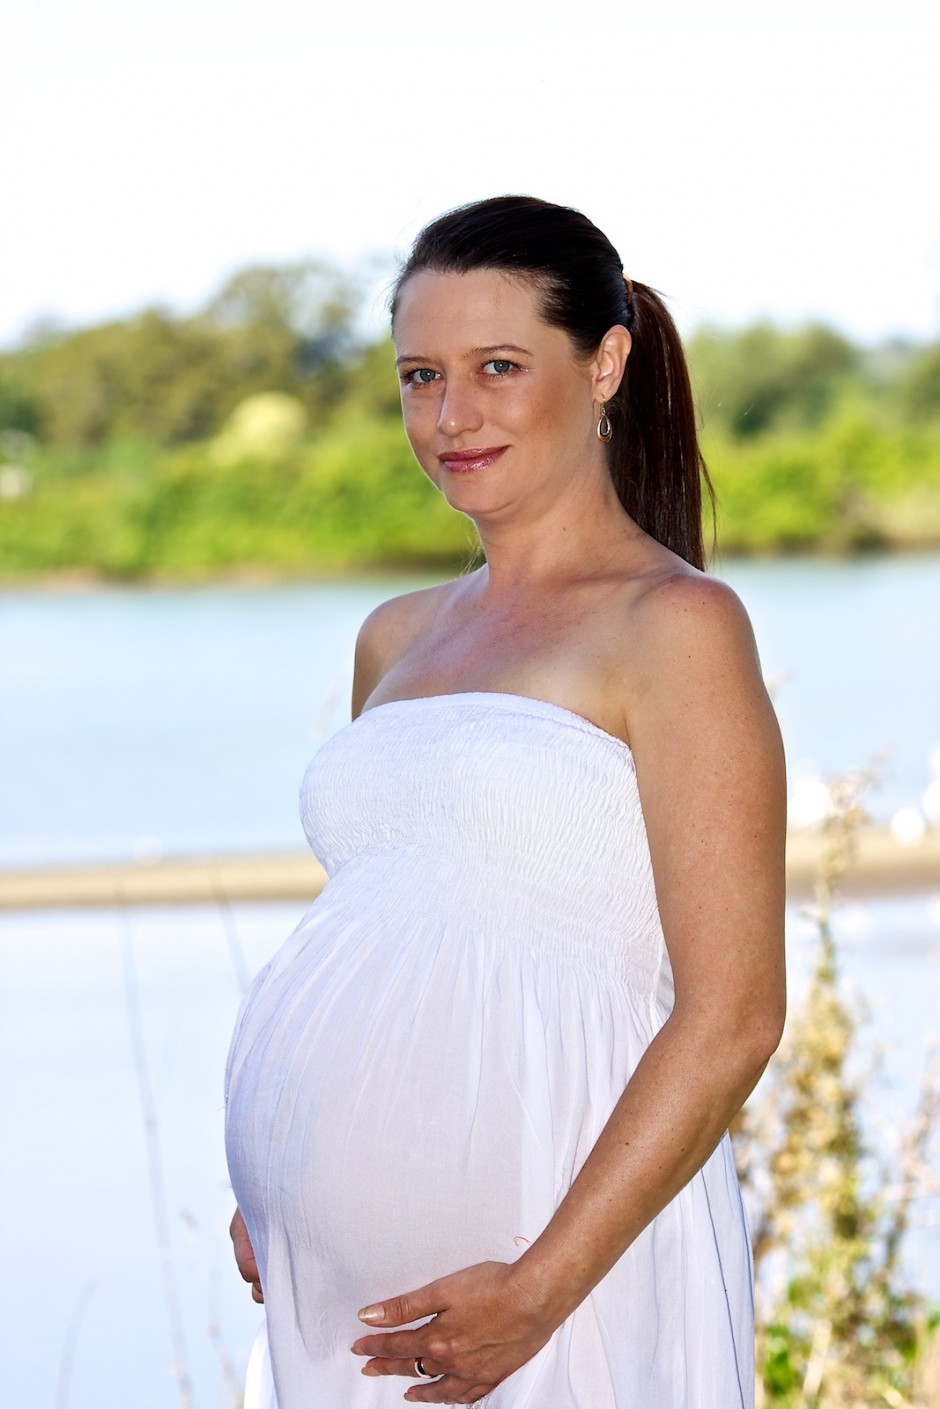 River side maternity photography - Taree